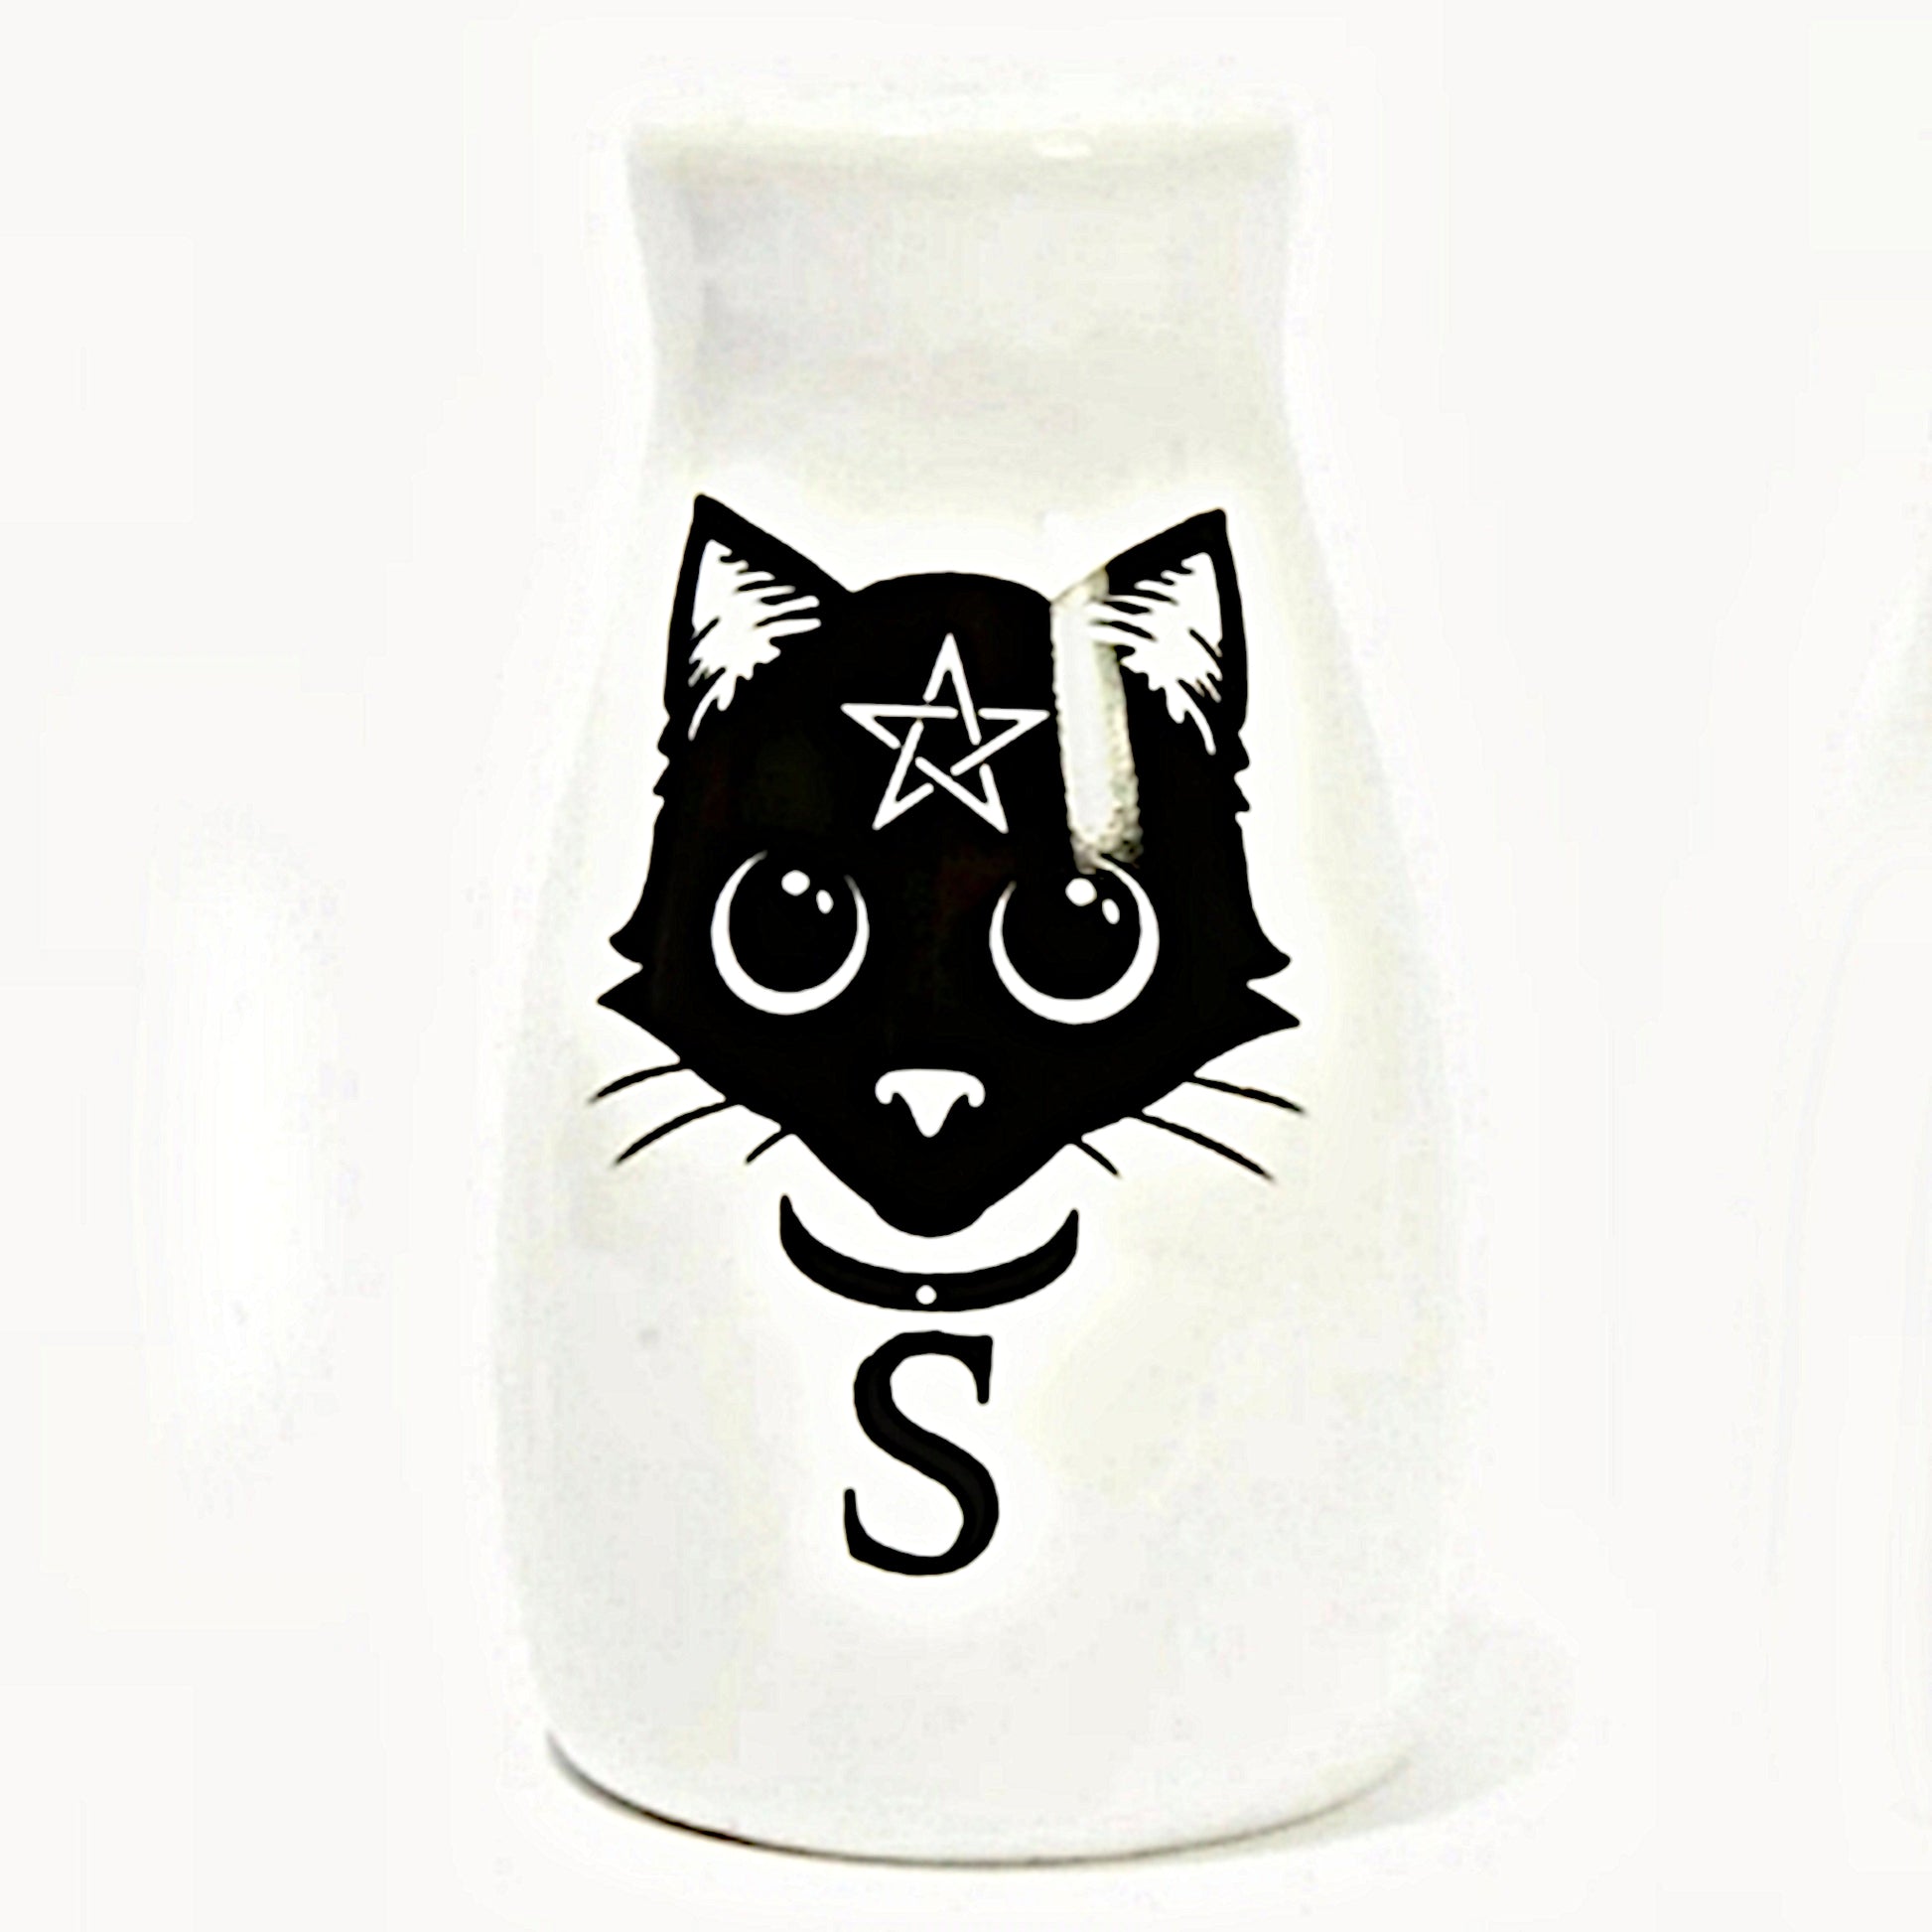 Salt & Pepper Shakers Set | Ceramic Gothic Cats Moon and Star - Alchemy Gothic - Cooking Utensils